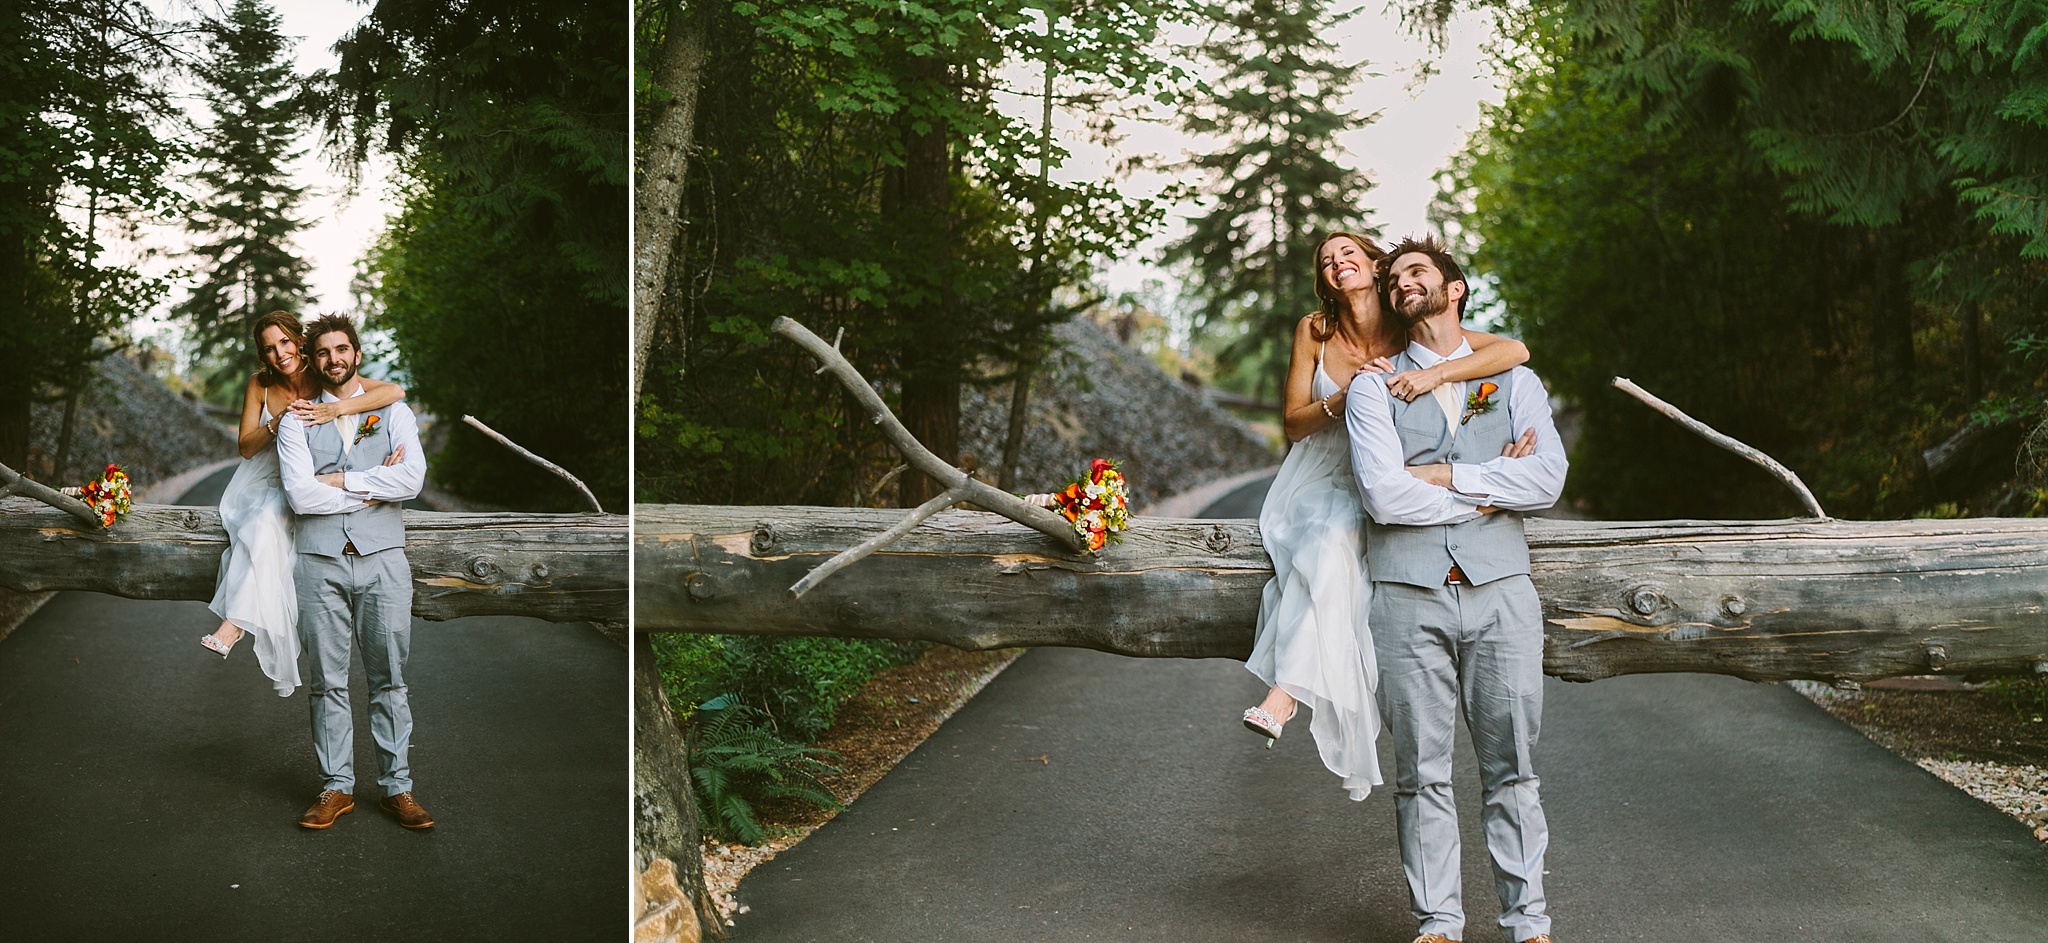 Sandpoint Idaho golf course wedding photo couple laughing in the woods